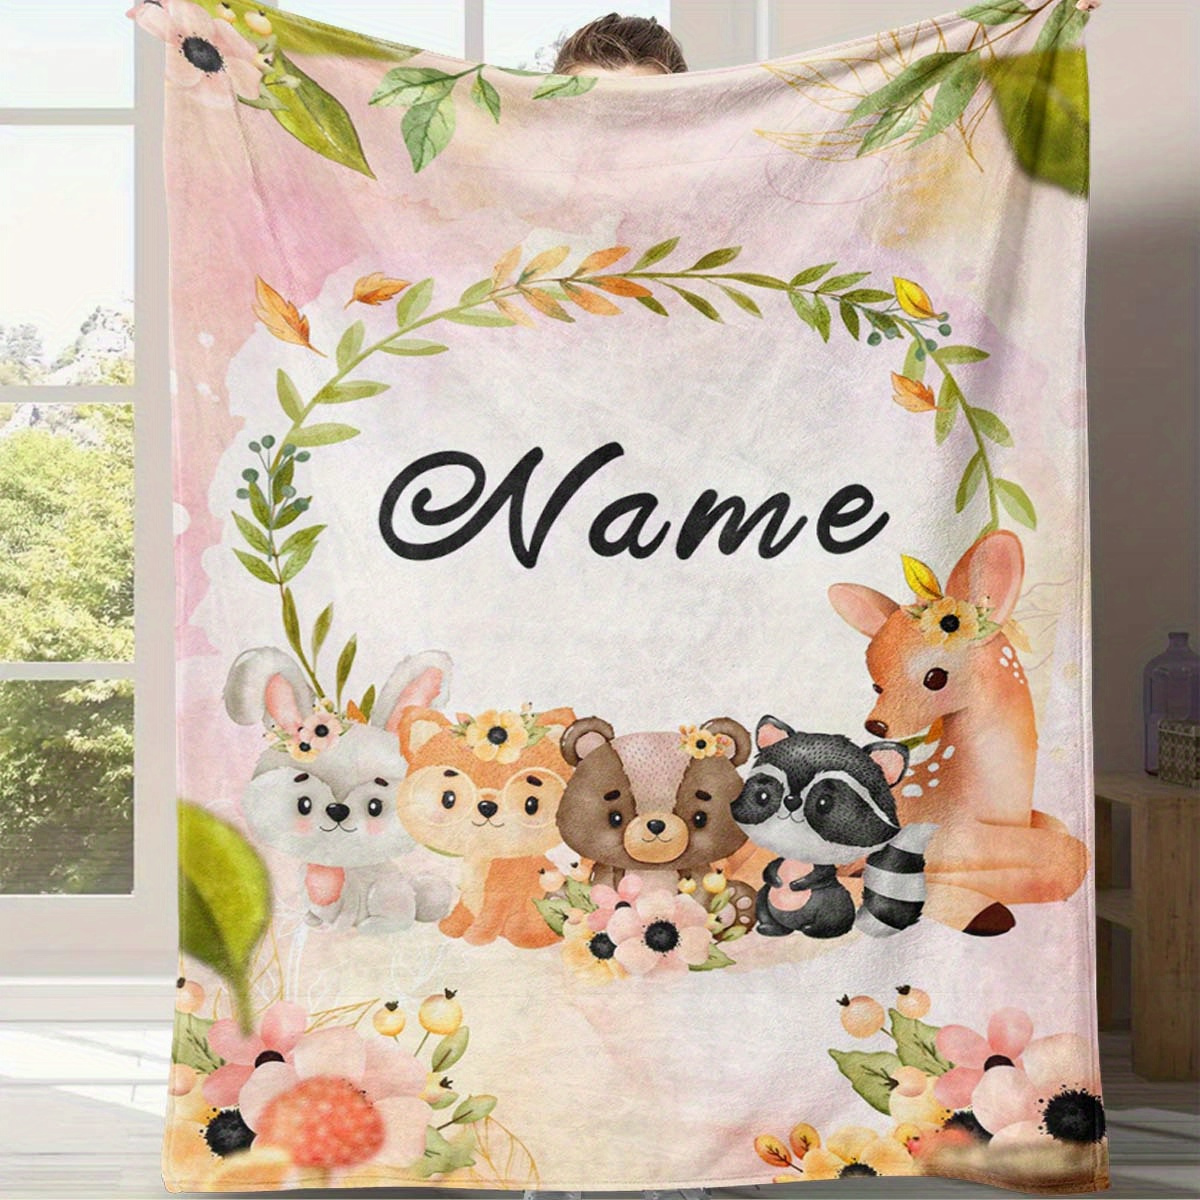 

Custom Cute Cartoon Forest Animal Giraffe, Bear, Rabbit Pattern Flannel Blanket - Personalized Name, All-season Outdoor Camping Throw, Machine Washable - Perfect Birthday Or Holiday Gift